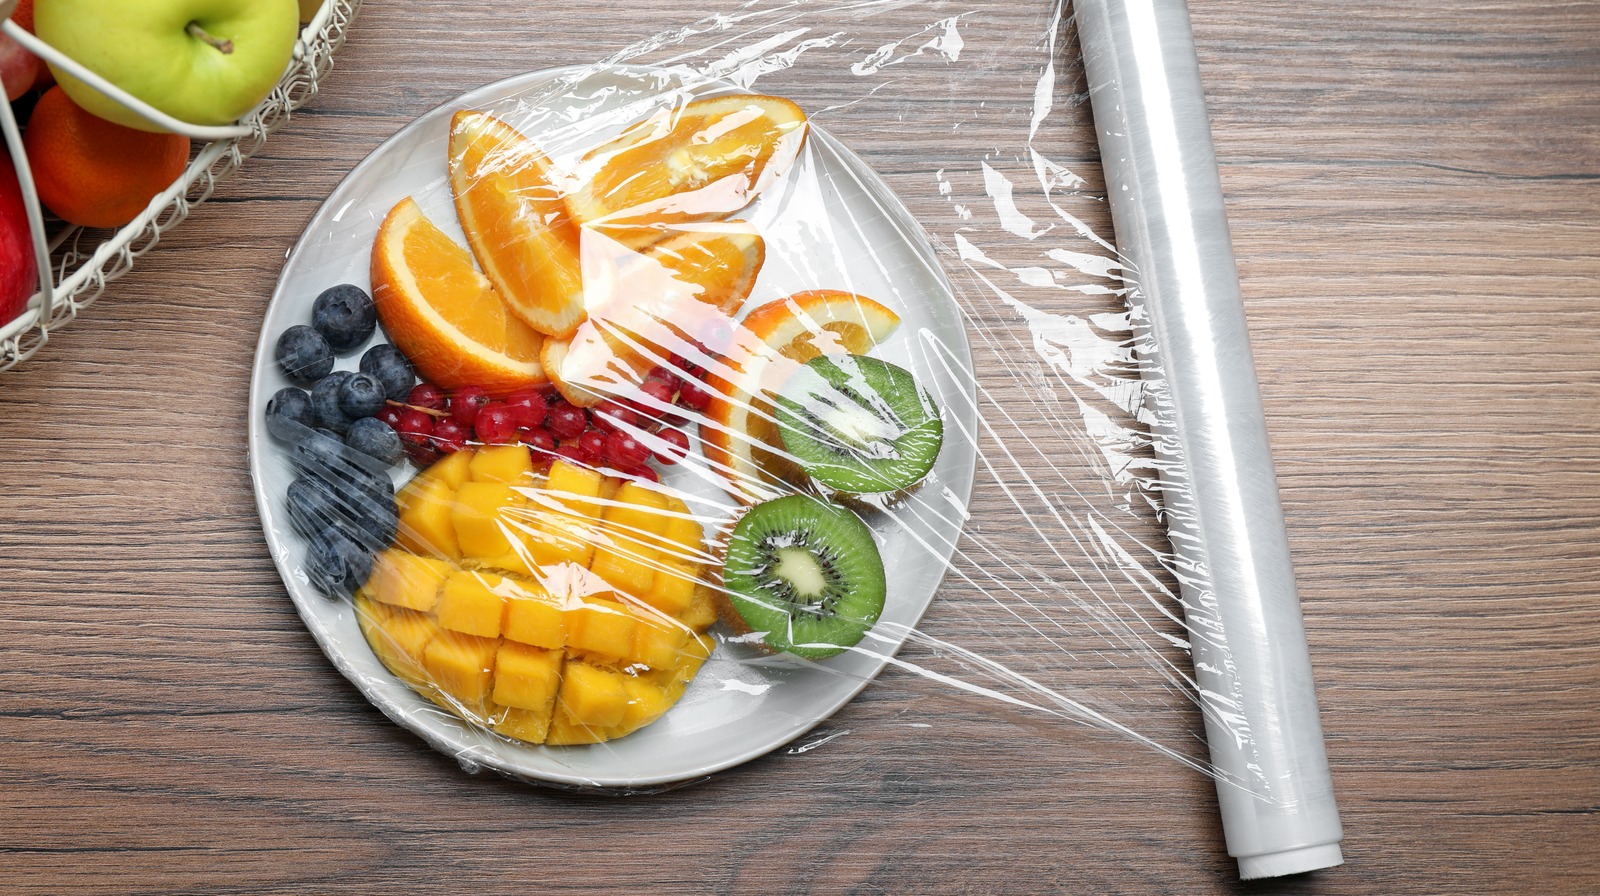 https://www.thedailymeal.com/img/gallery/12-clever-ways-to-use-plastic-wrap/l-intro-1678458898.jpg